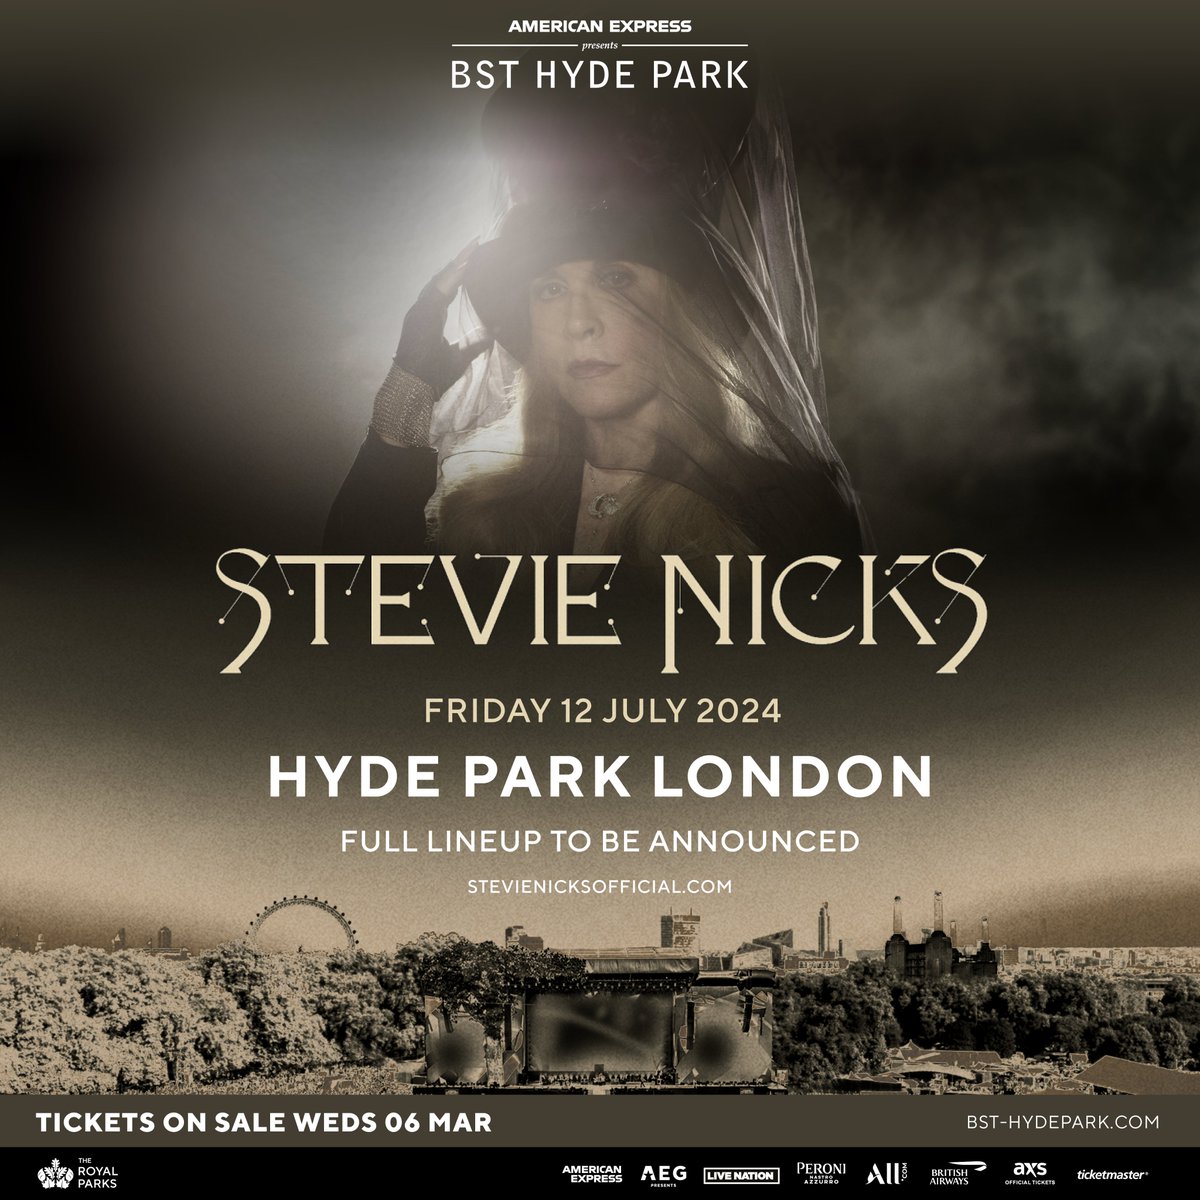 We're thrilled to announce that music legend @StevieNicks is headlining American Express presents BST Hyde Park on Friday 12 July 2024, with a full lineup to be announced 🌙 🎟 BST Hyde Park presale goes live at 10am GMT Monday 4 March. Get access to the Stevie Nicks presale…